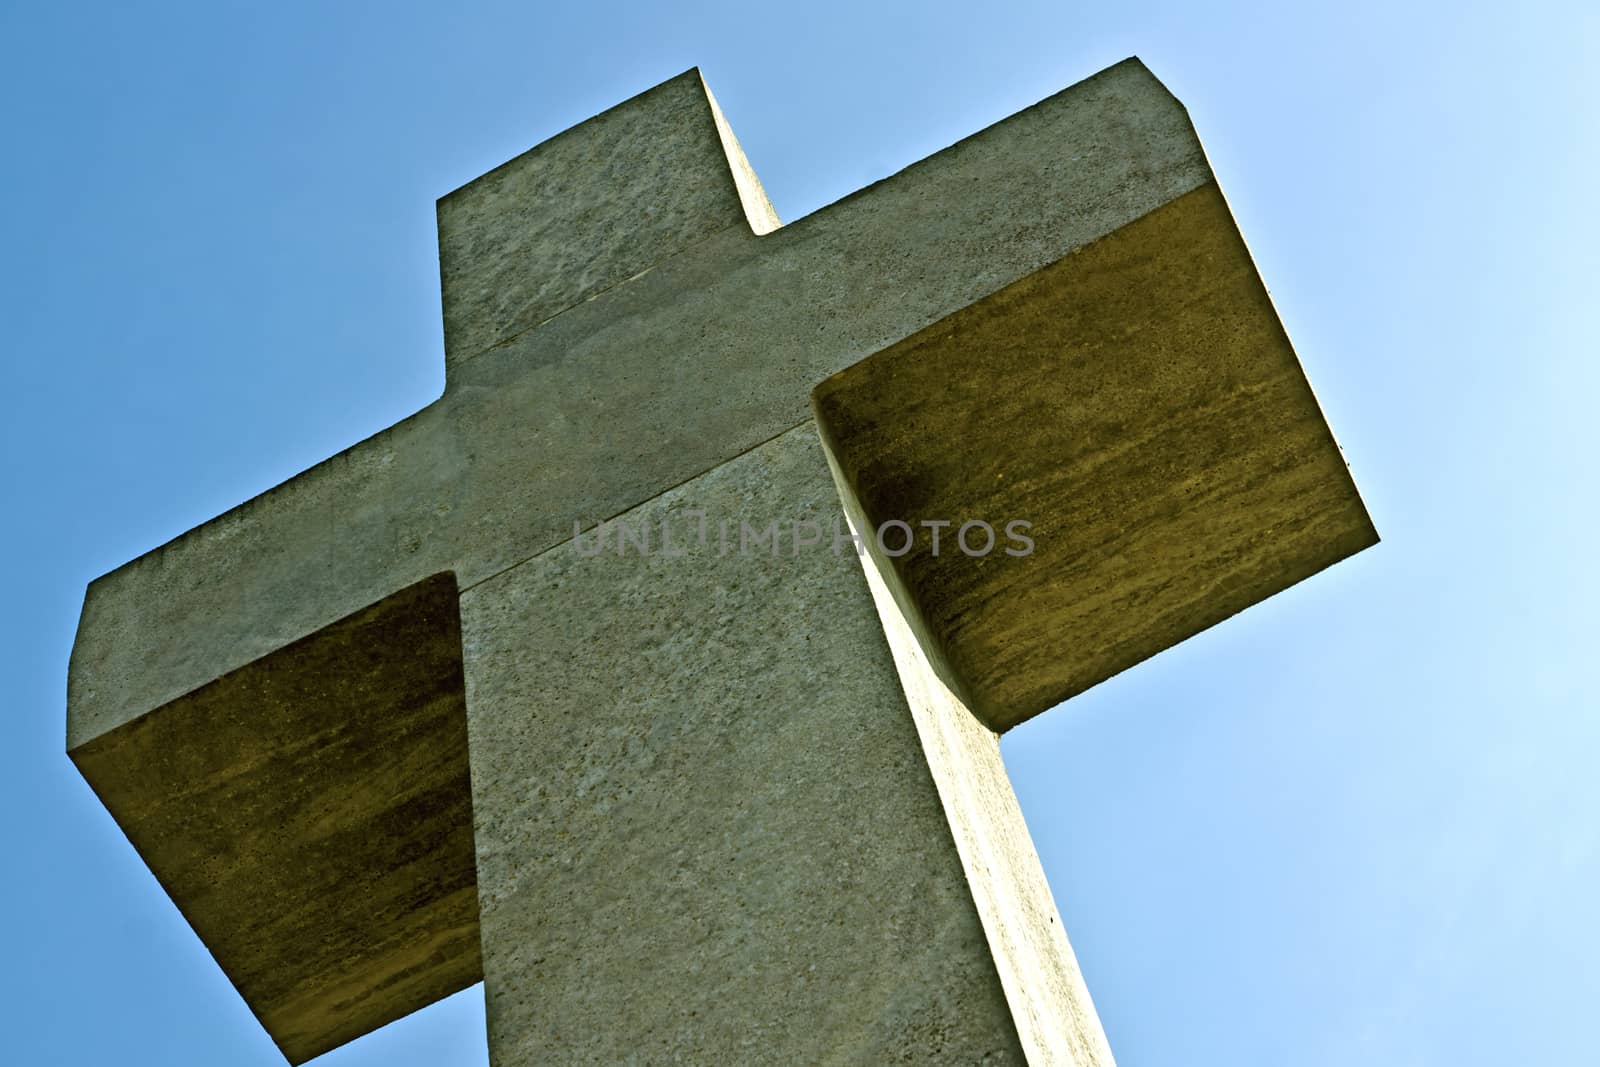 A large stone cross photographed in a cemetery with graves of war.